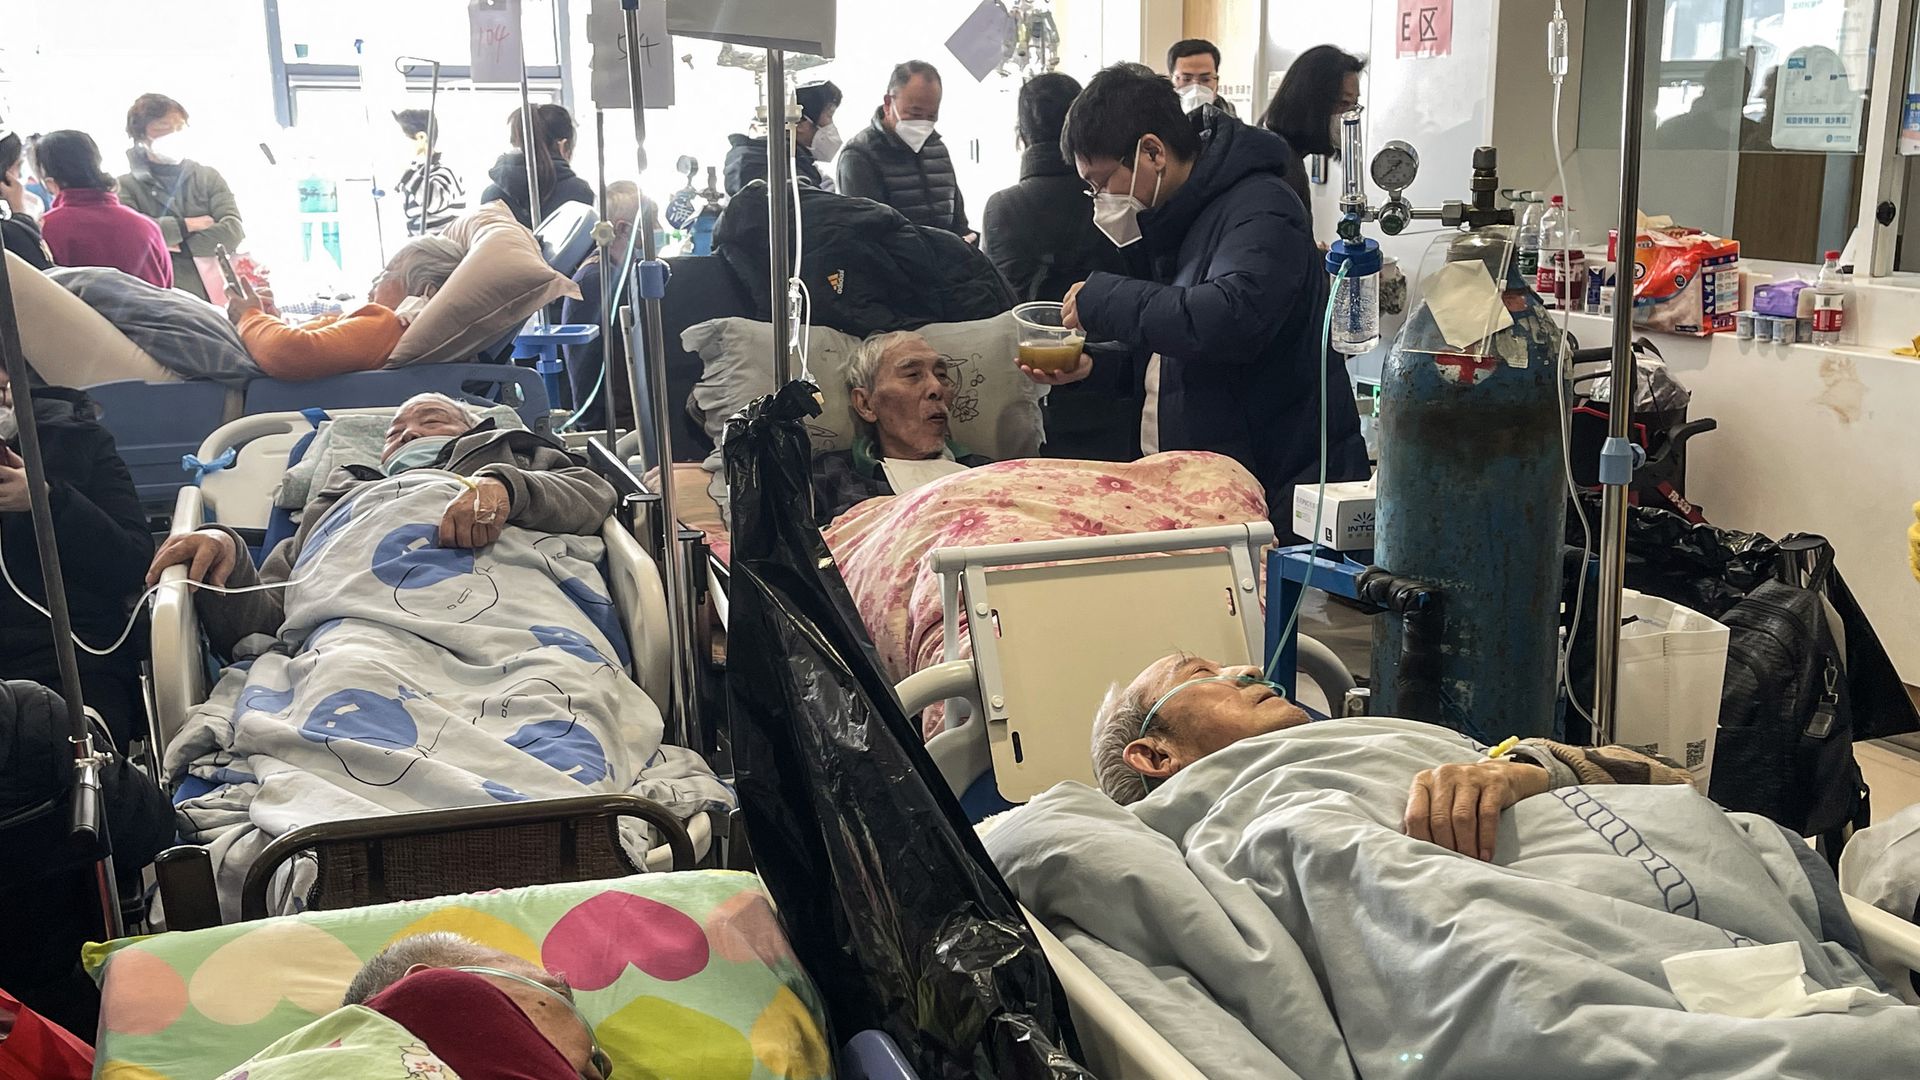 Patients on stretchers are seen at Tongren hospital in Shanghai on January 3, 2023.